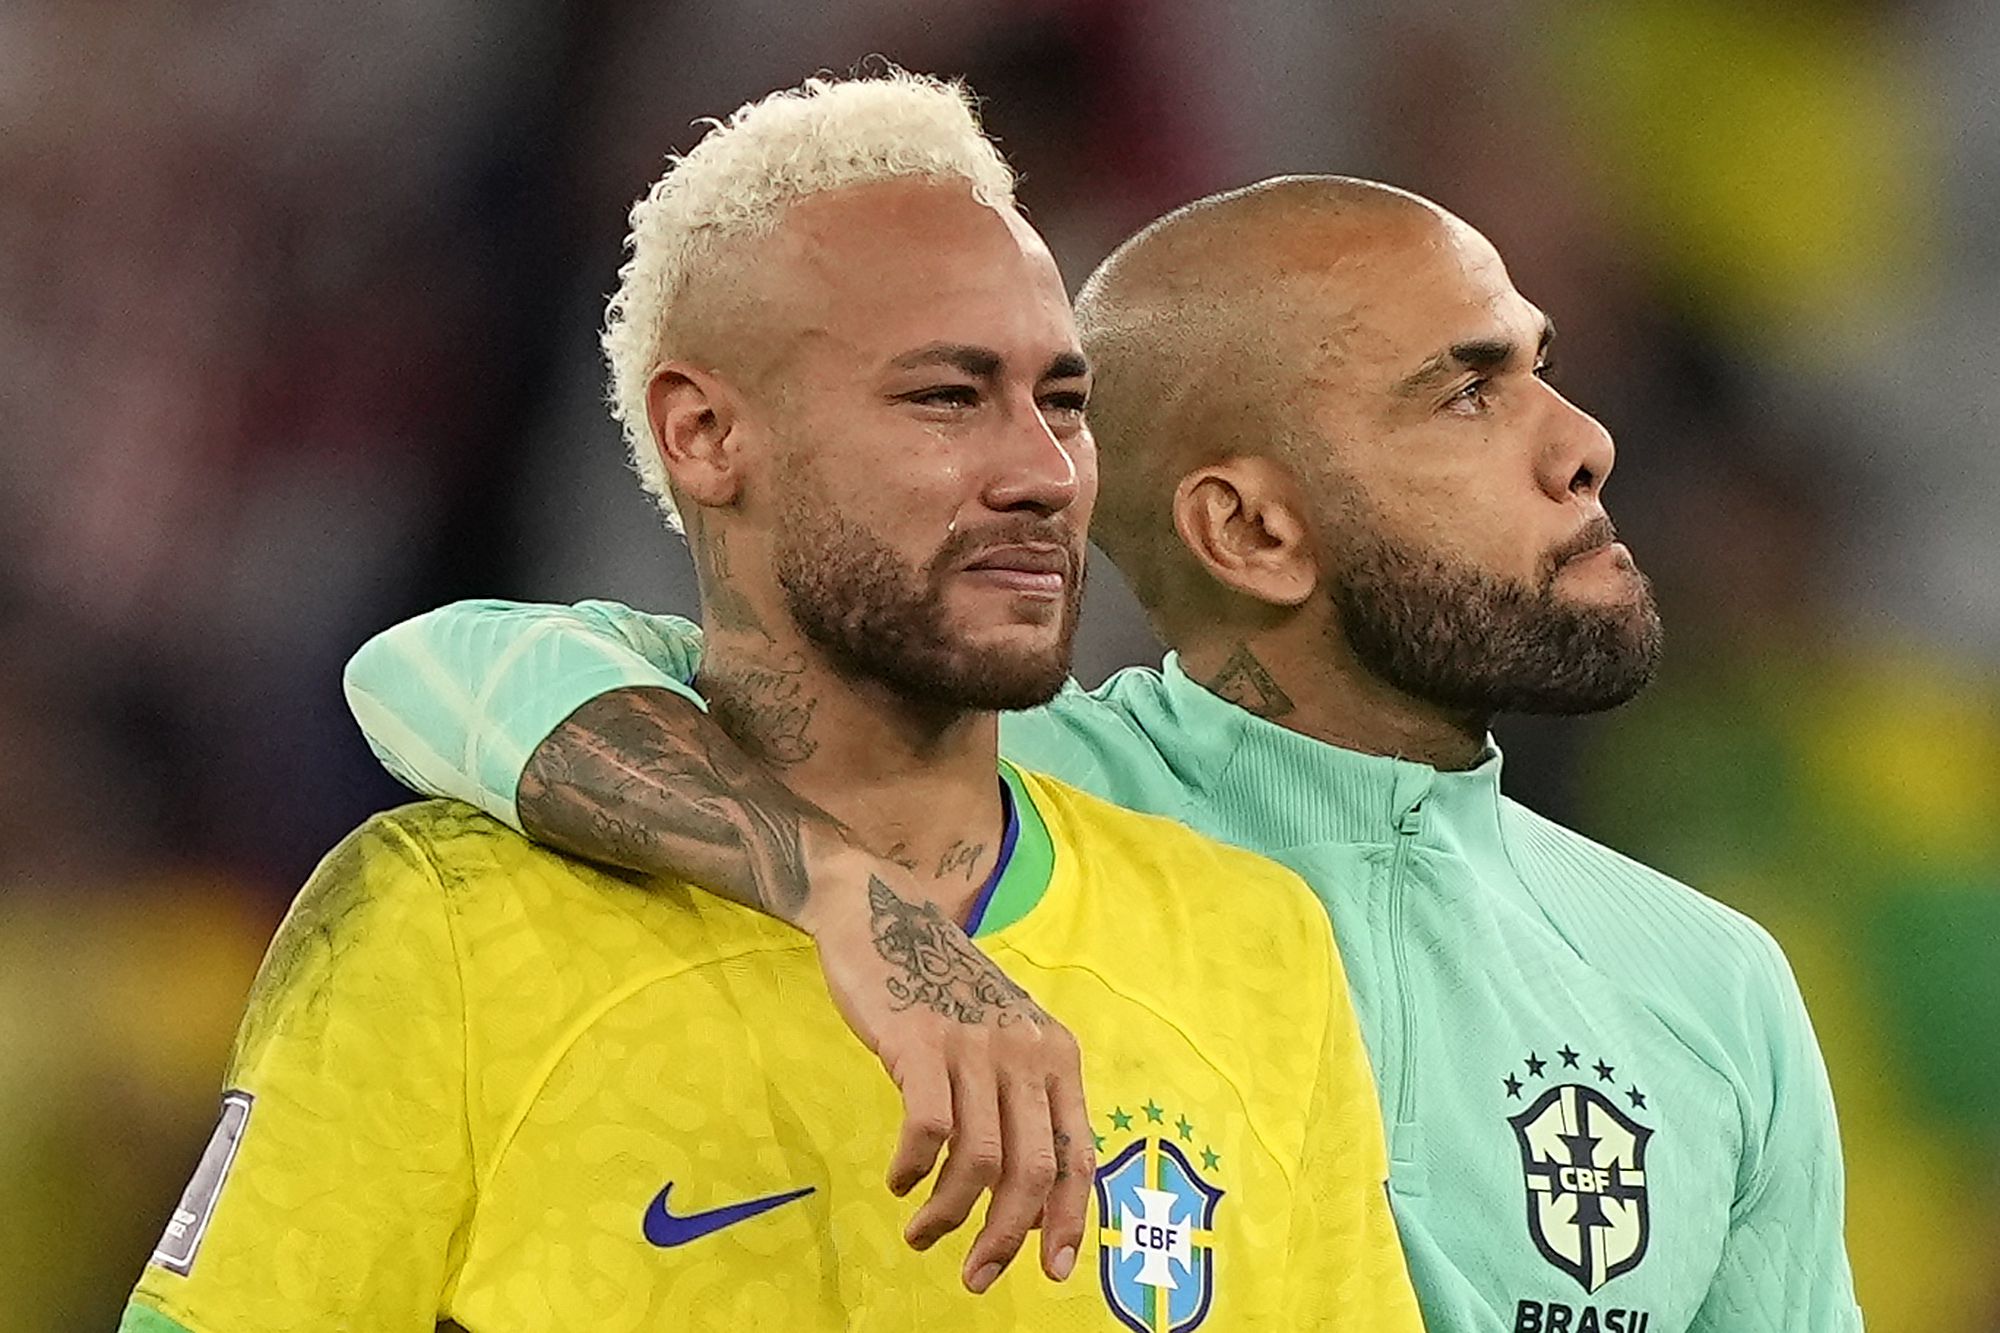 Is this the end for Neymar? From World Cup legend to loser in 10 minutes